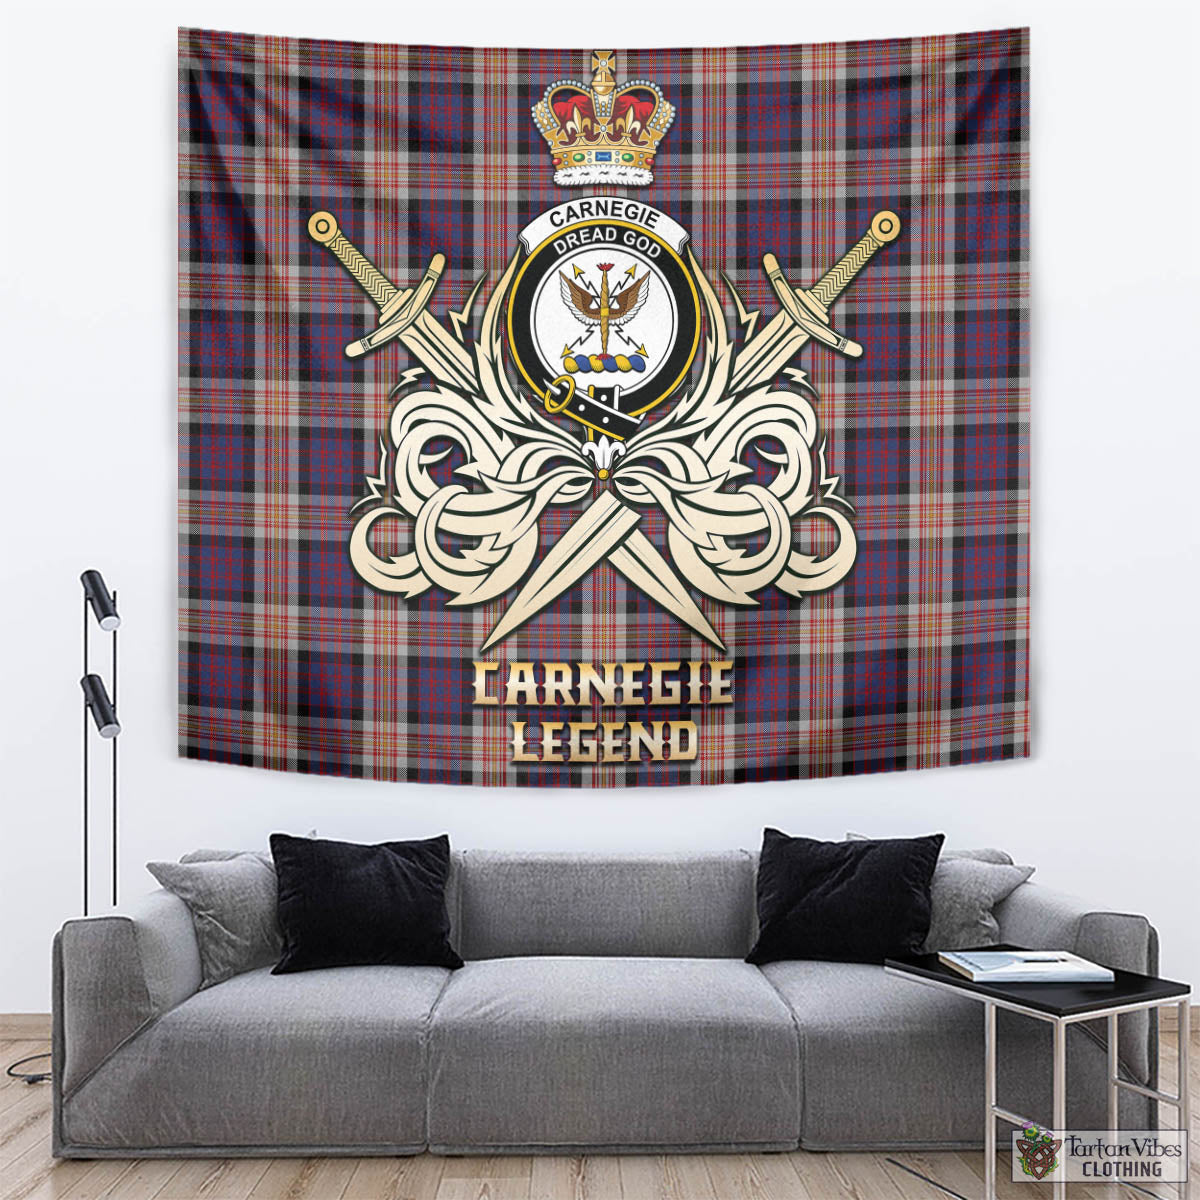 Tartan Vibes Clothing Carnegie Tartan Tapestry with Clan Crest and the Golden Sword of Courageous Legacy